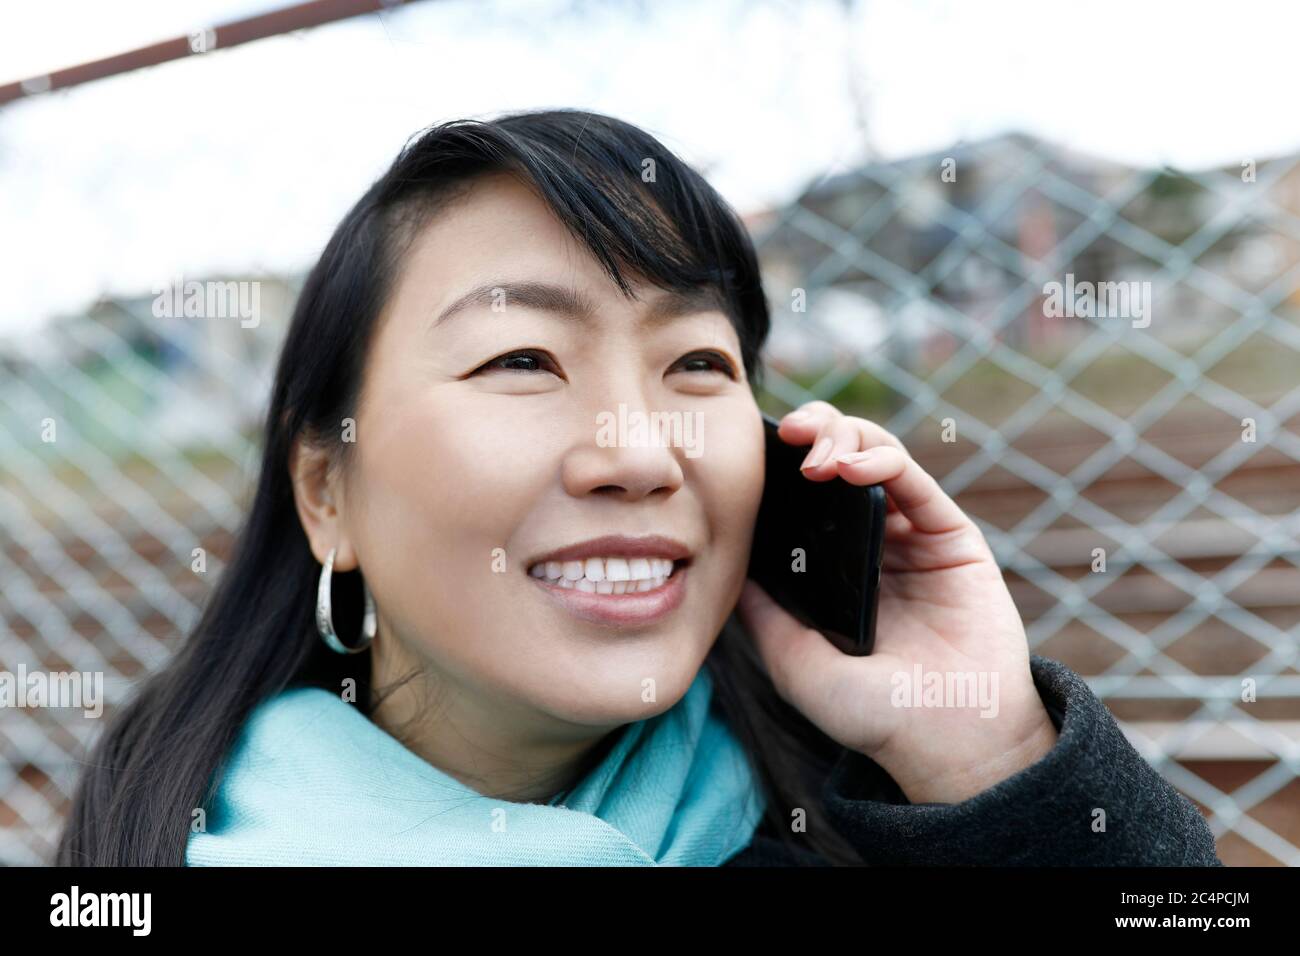 Japanese Mature Woman Face High Resolution Stock Photography And Images Alamy